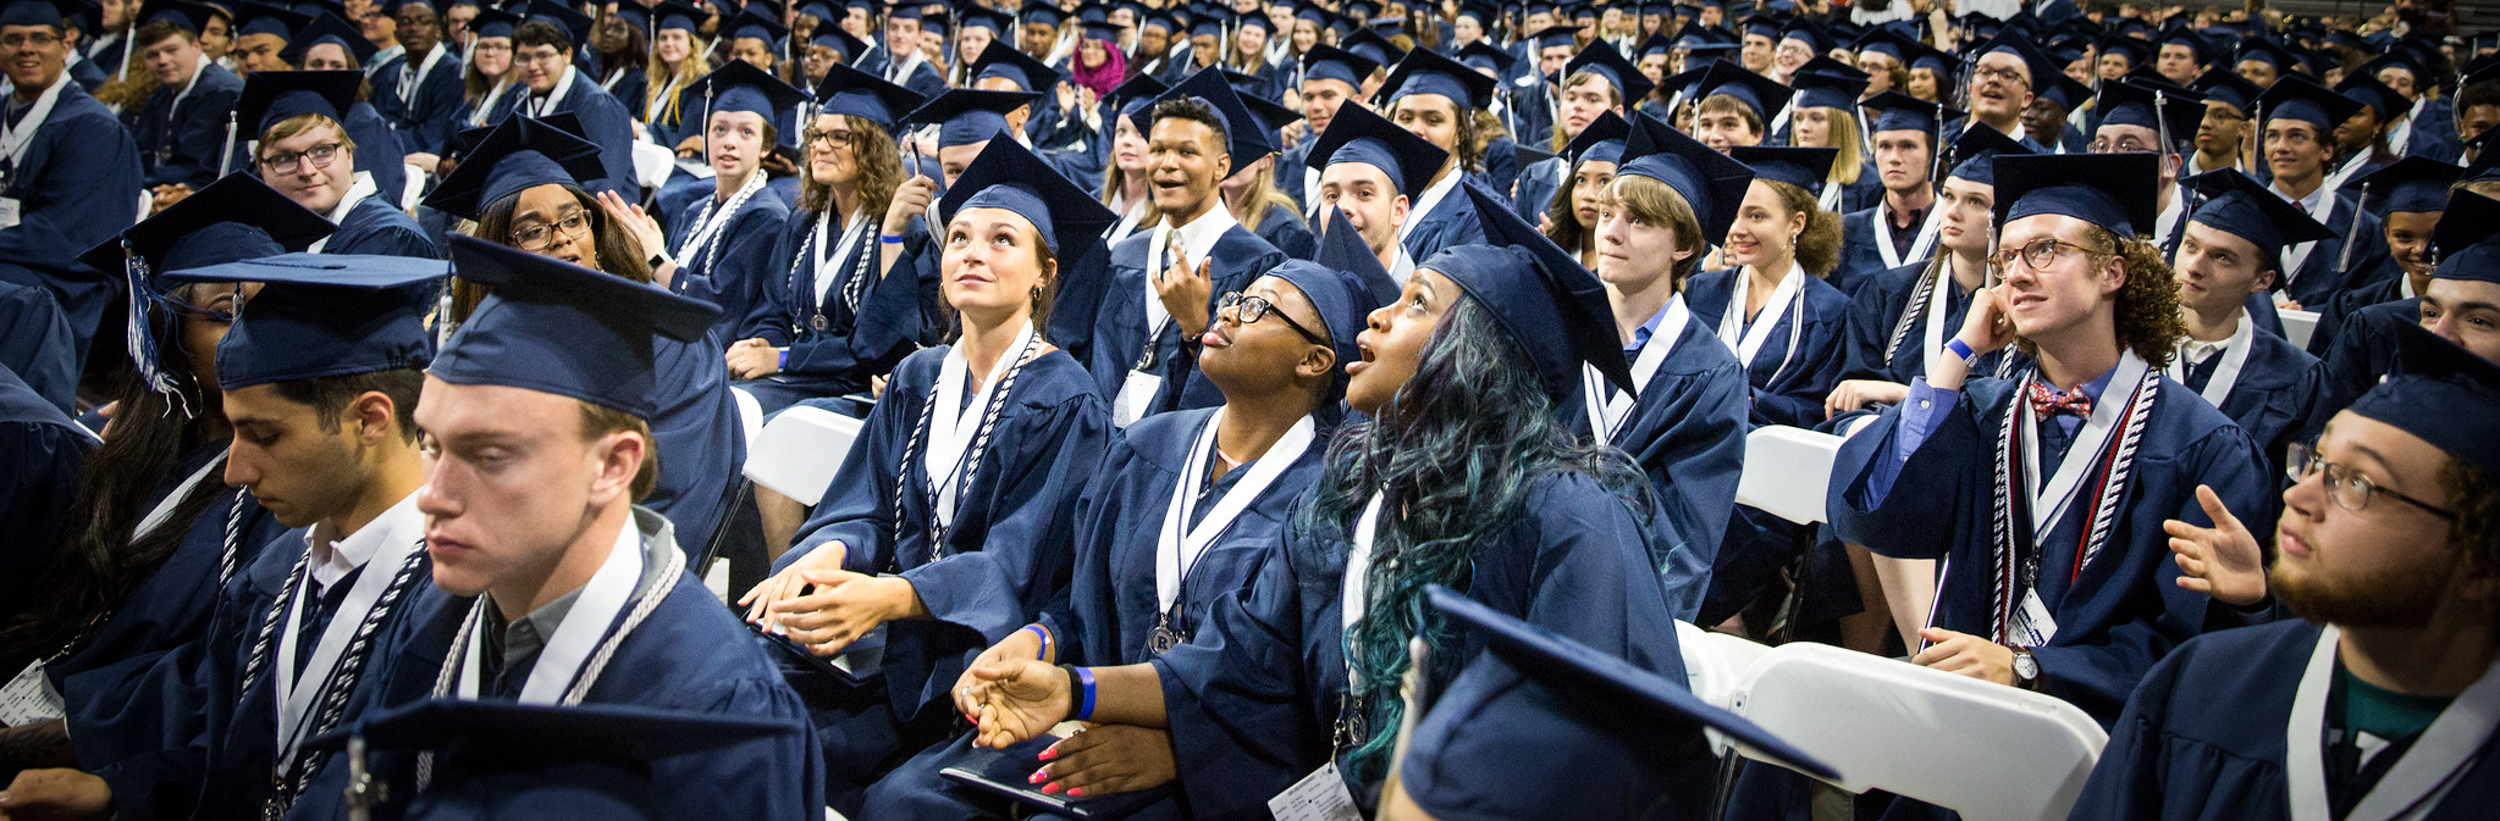 Join the Commencement Celebrations for the Class of 2019